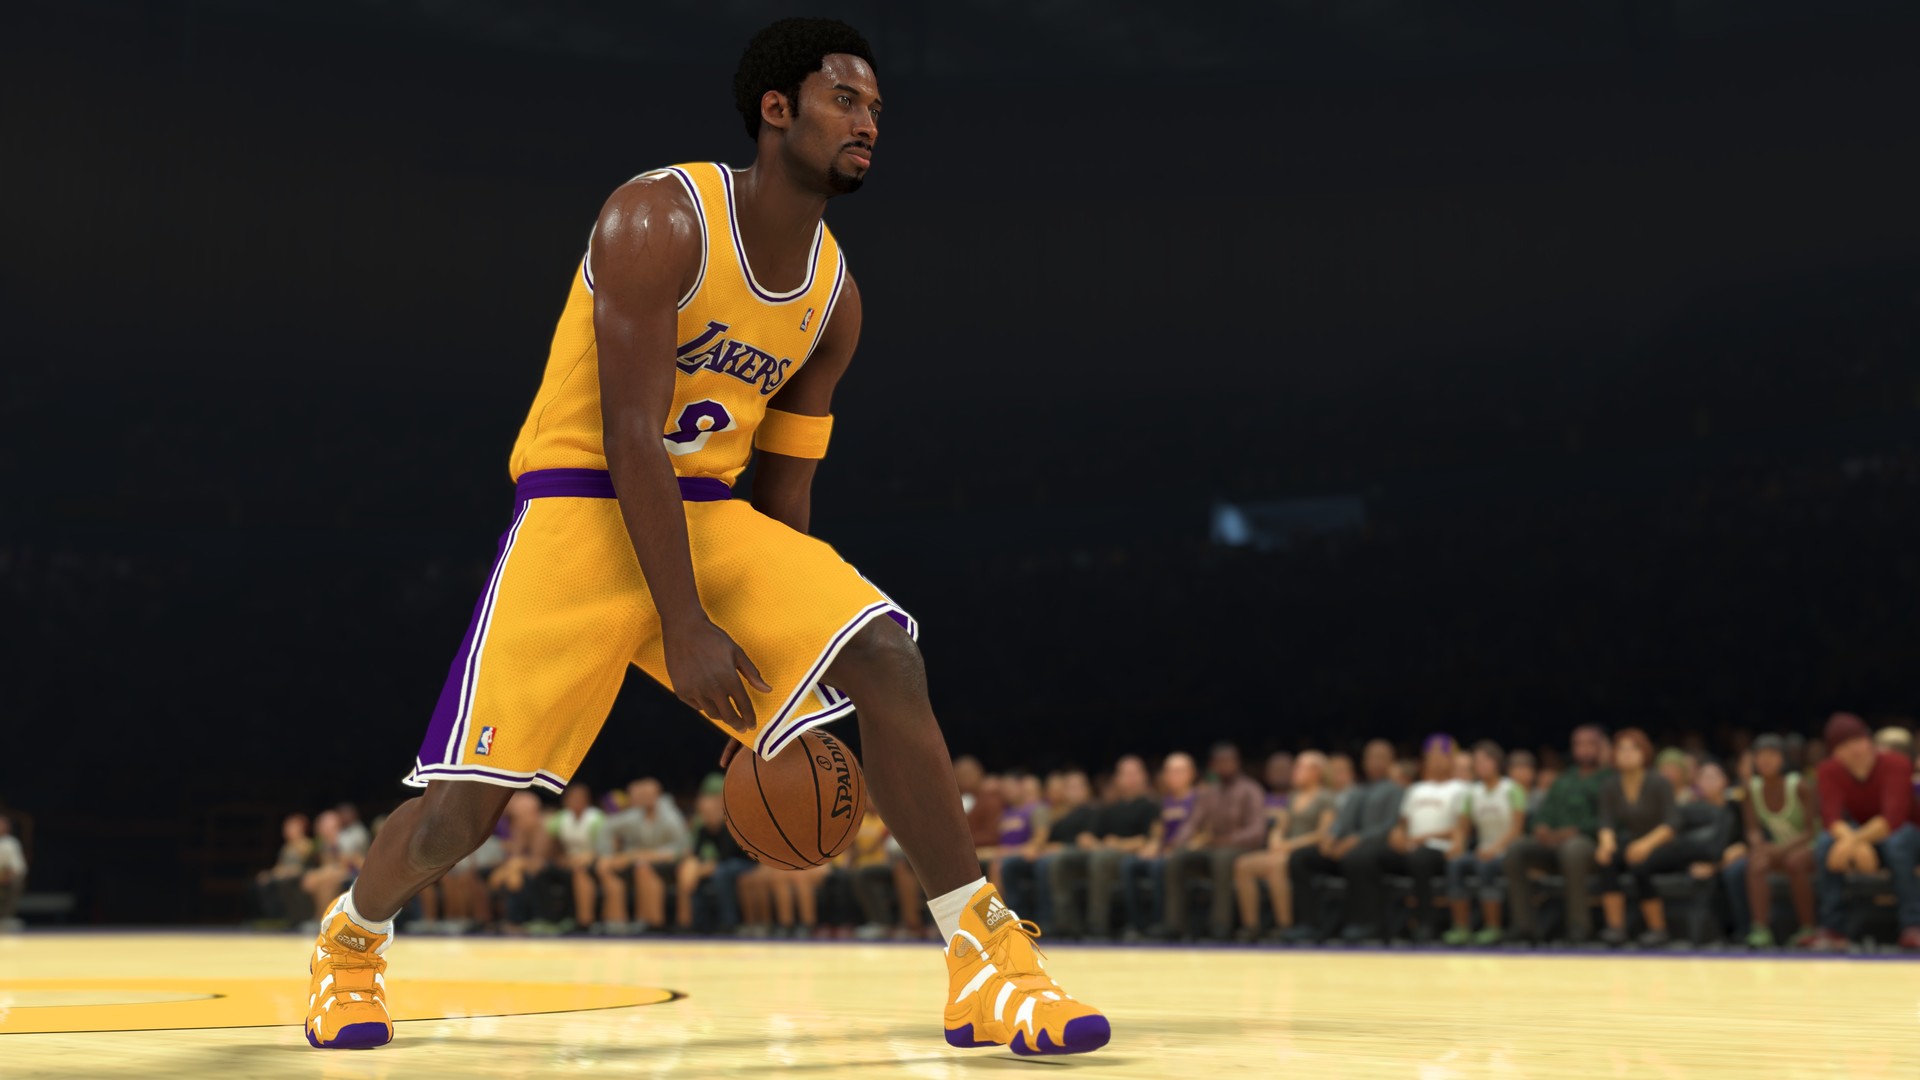 NBA 2K21 has a multitude of brands from the game, Humboldt, California, United States